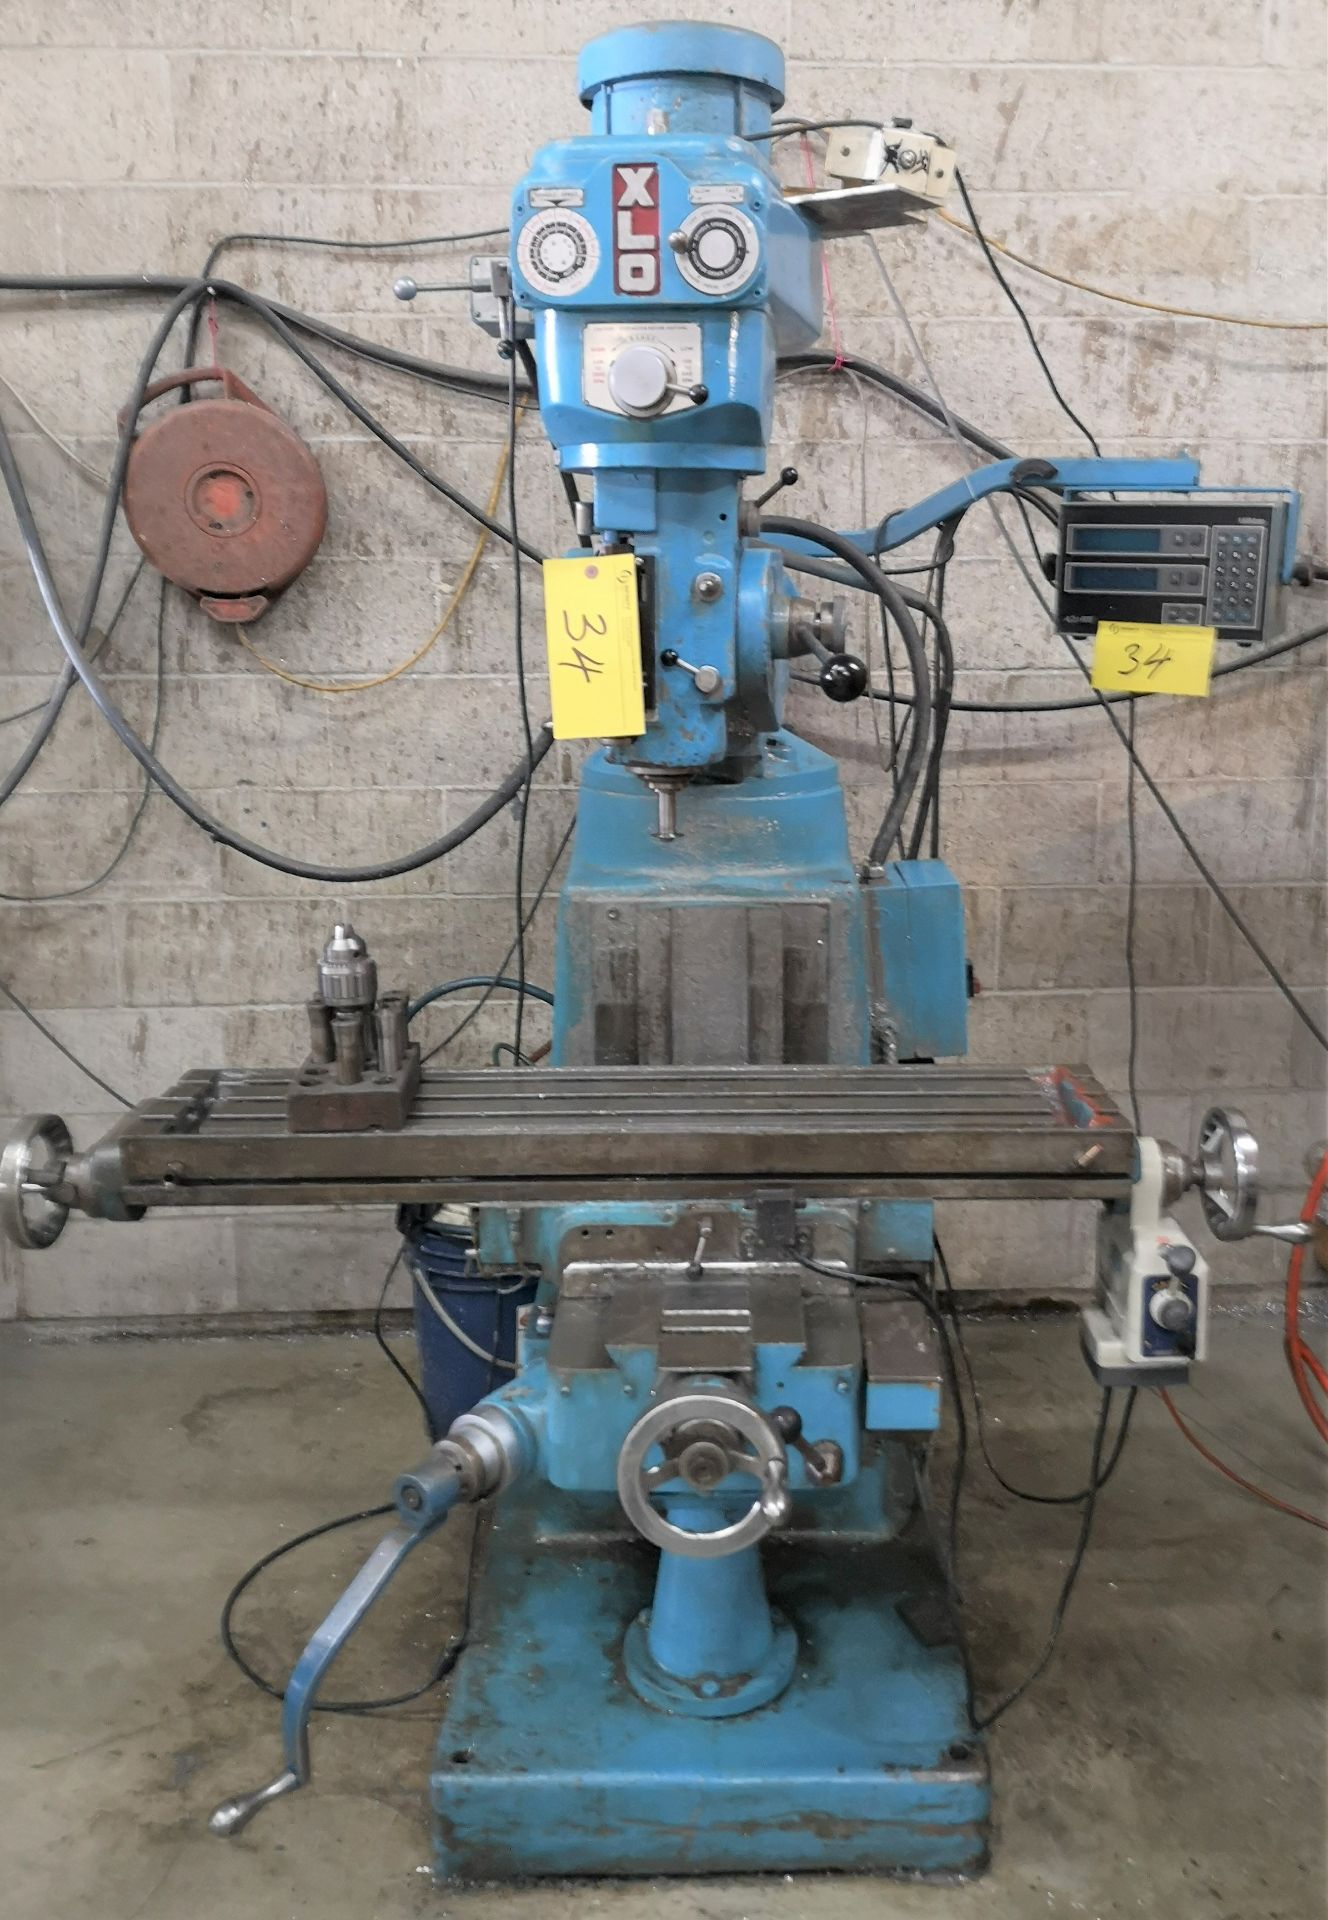 EX-CELL-O 602 Vertical Mill, Acu-rite 2-Axis DRO, 9” x 42” Table, Speeds to 3,800 RPM, Align Power